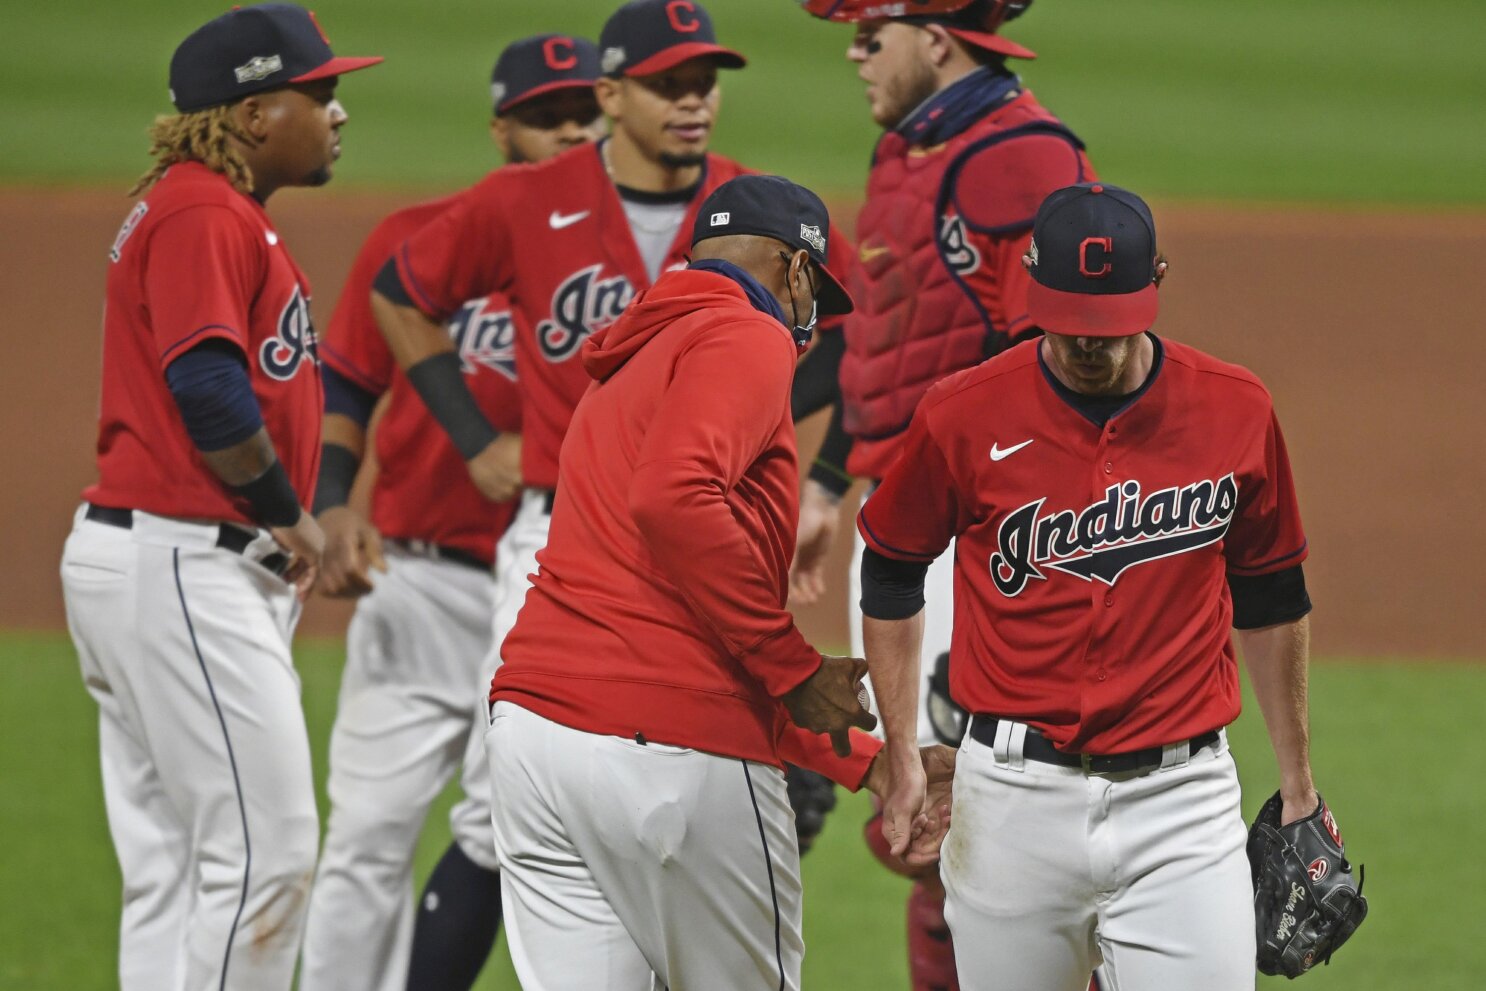 Cleveland Indians Playoff History: The midges game